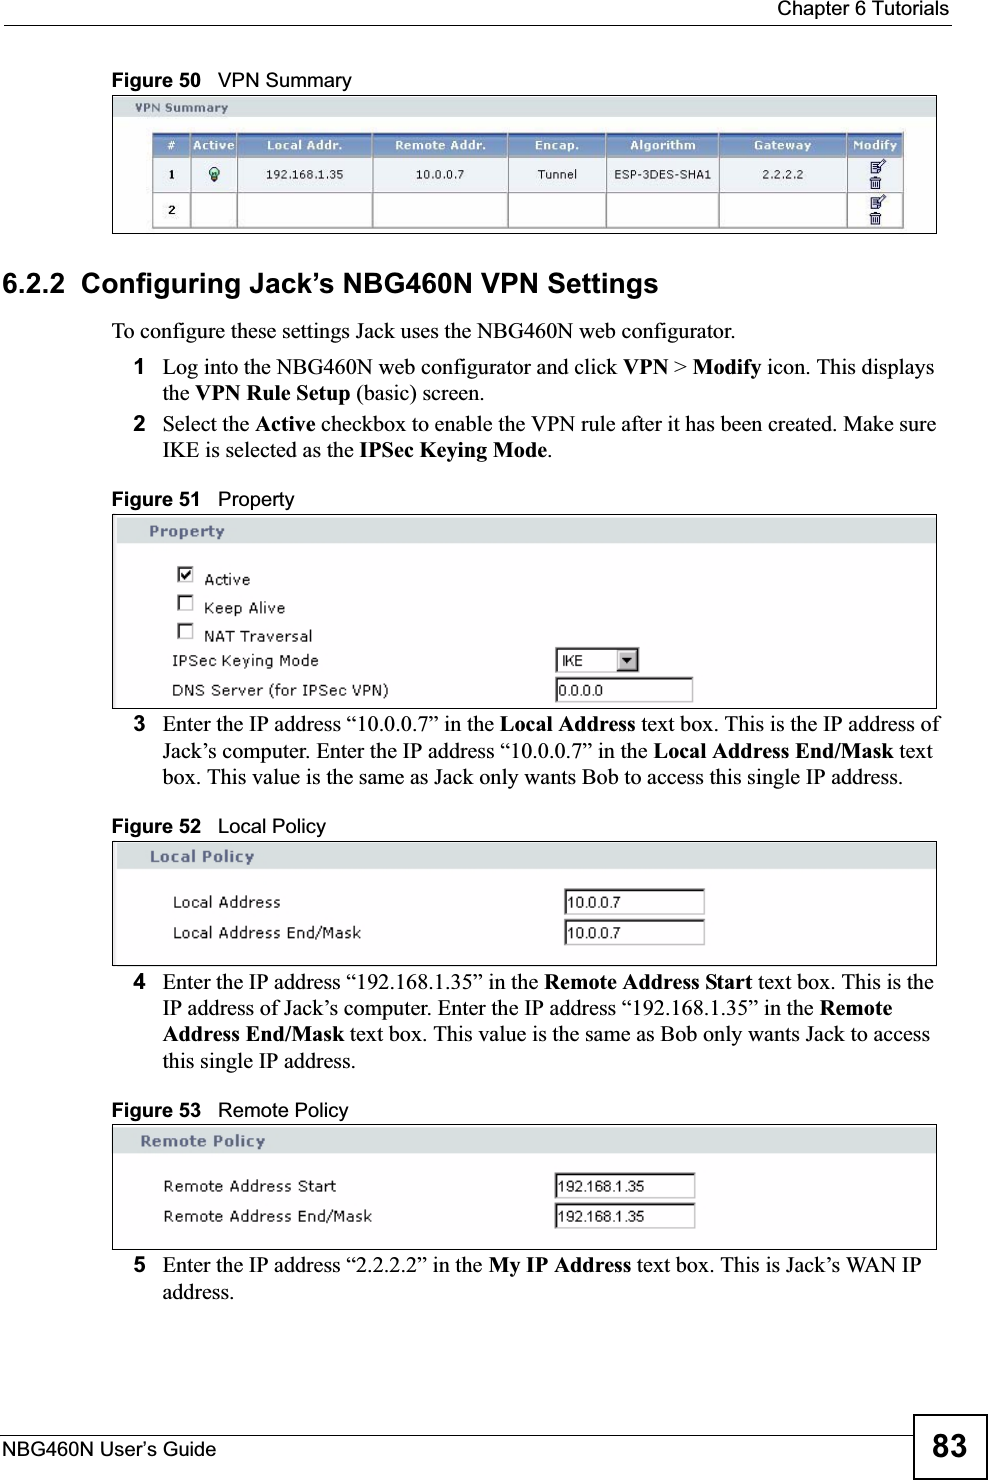  Chapter 6 TutorialsNBG460N User’s Guide 83Figure 50   VPN Summary6.2.2  Configuring Jack’s NBG460N VPN SettingsTo configure these settings Jack uses the NBG460N web configurator.1Log into the NBG460N web configurator and click VPN &gt; Modify icon. This displays the VPN Rule Setup (basic) screen.2Select the Active checkbox to enable the VPN rule after it has been created. Make sure IKE is selected as the IPSec Keying Mode.Figure 51   Property3Enter the IP address “10.0.0.7” in the Local Address text box. This is the IP address of Jack’s computer. Enter the IP address “10.0.0.7” in the Local Address End/Mask text box. This value is the same as Jack only wants Bob to access this single IP address.Figure 52   Local Policy4Enter the IP address “192.168.1.35” in the Remote Address Start text box. This is the IP address of Jack’s computer. Enter the IP address “192.168.1.35” in the Remote Address End/Mask text box. This value is the same as Bob only wants Jack to access this single IP address.Figure 53   Remote Policy5Enter the IP address “2.2.2.2” in the My IP Address text box. This is Jack’s WAN IP address.